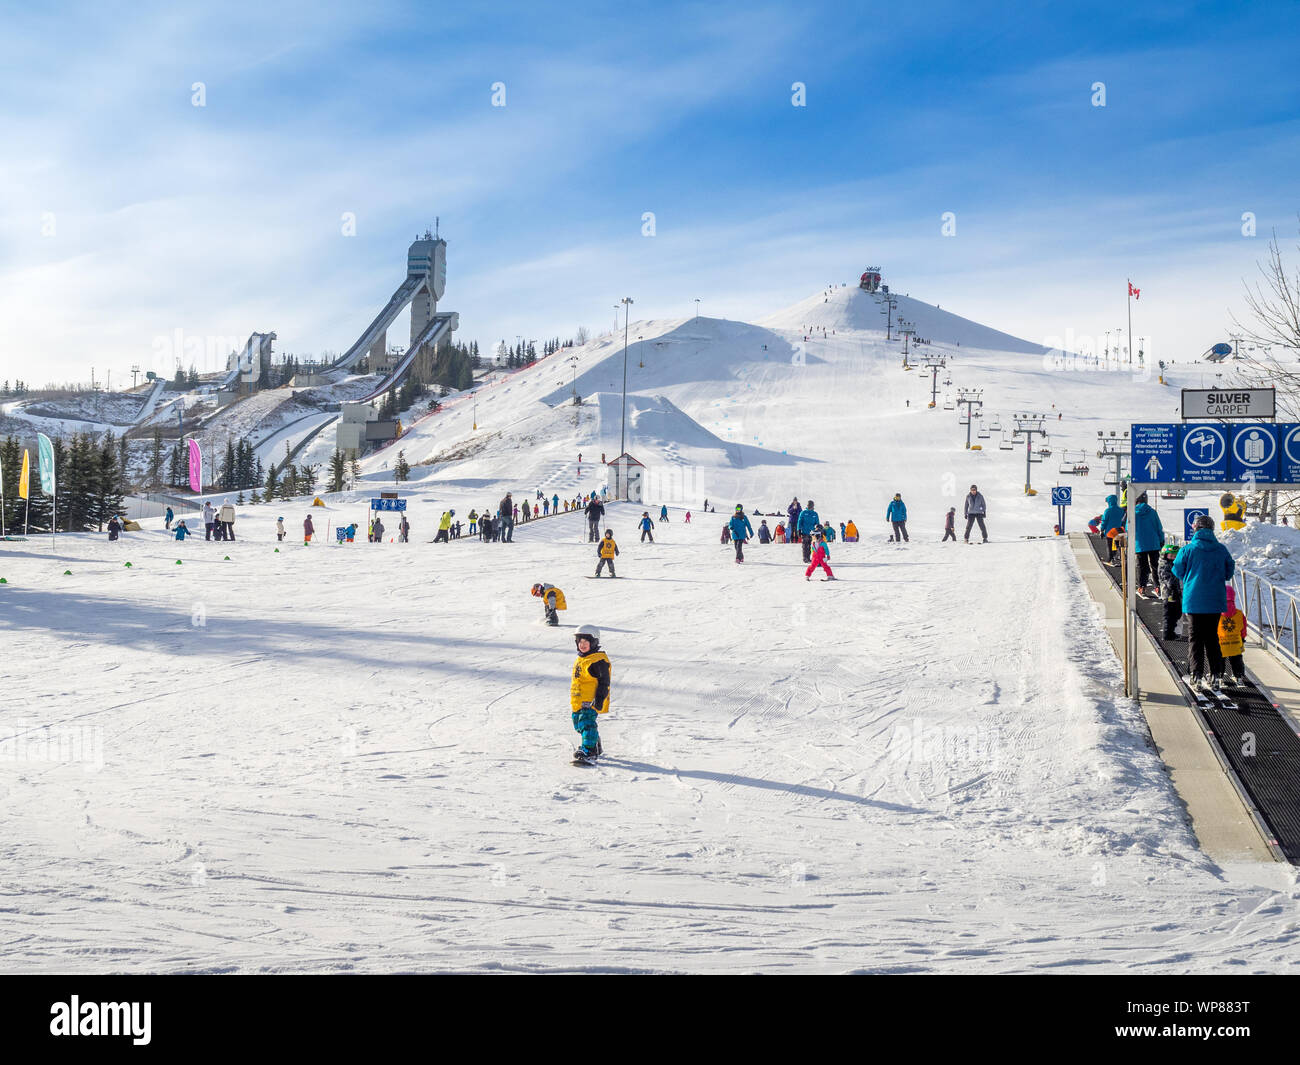 CALGARY, CANADA - MAR 1: Kids learning to ski at Canada Park on March 1, 2015 in Calgary, Alberta Canada. Visible are toddlers in a pre-school skiing Stock Photo